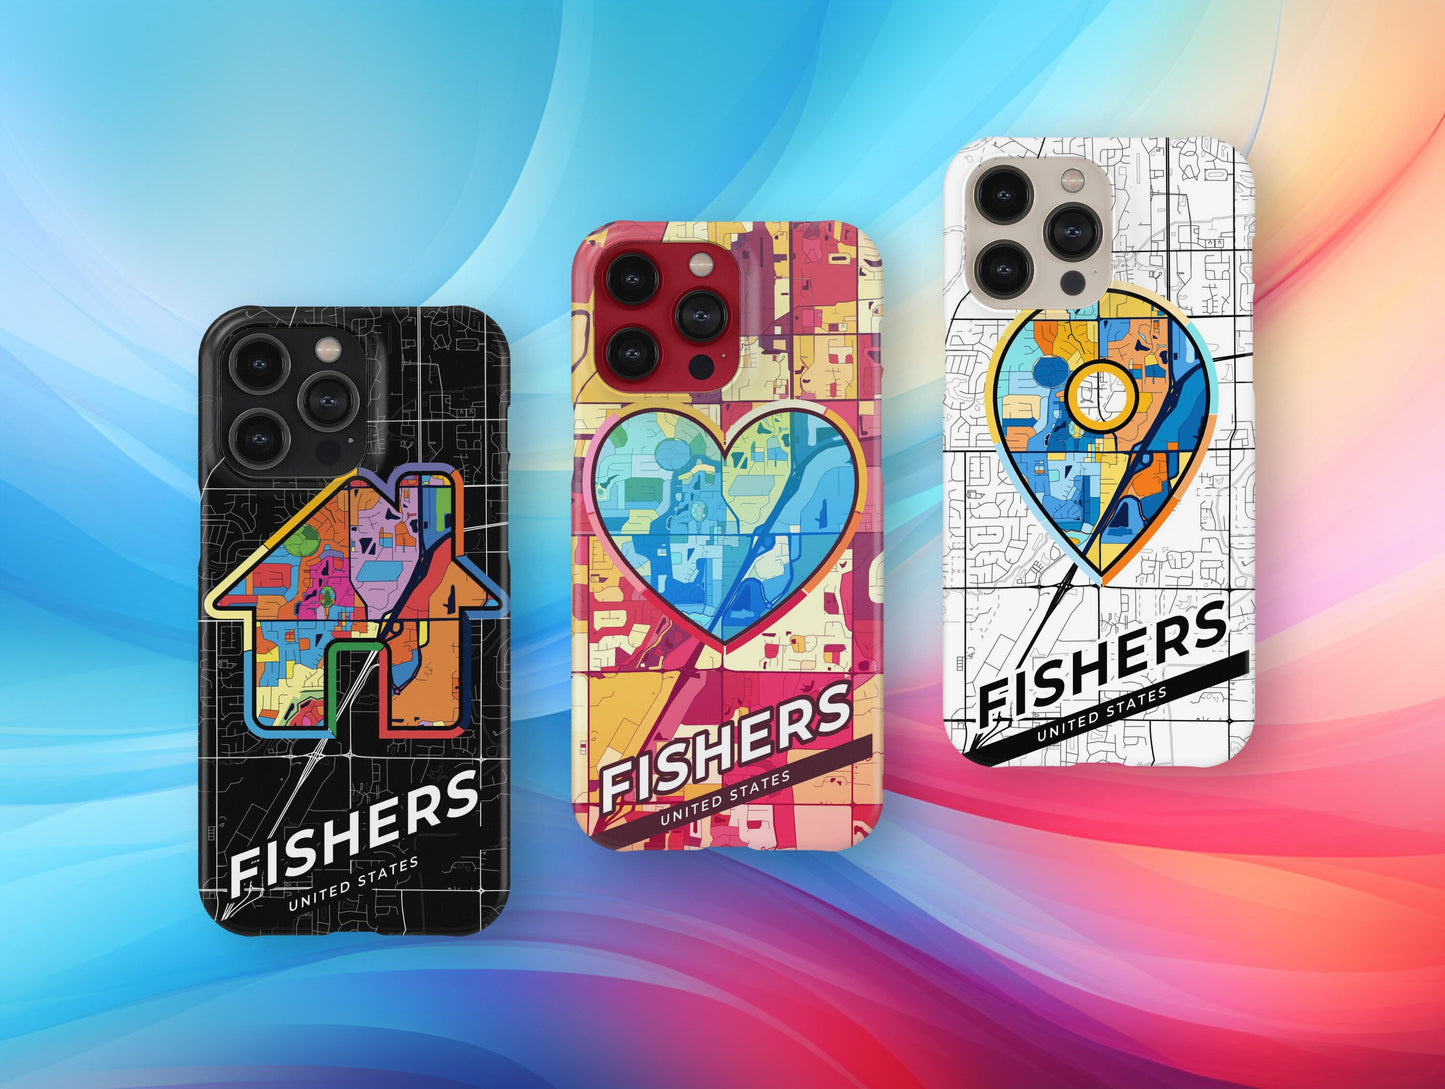 Fishers Indiana slim phone case with colorful icon. Birthday, wedding or housewarming gift. Couple match cases.